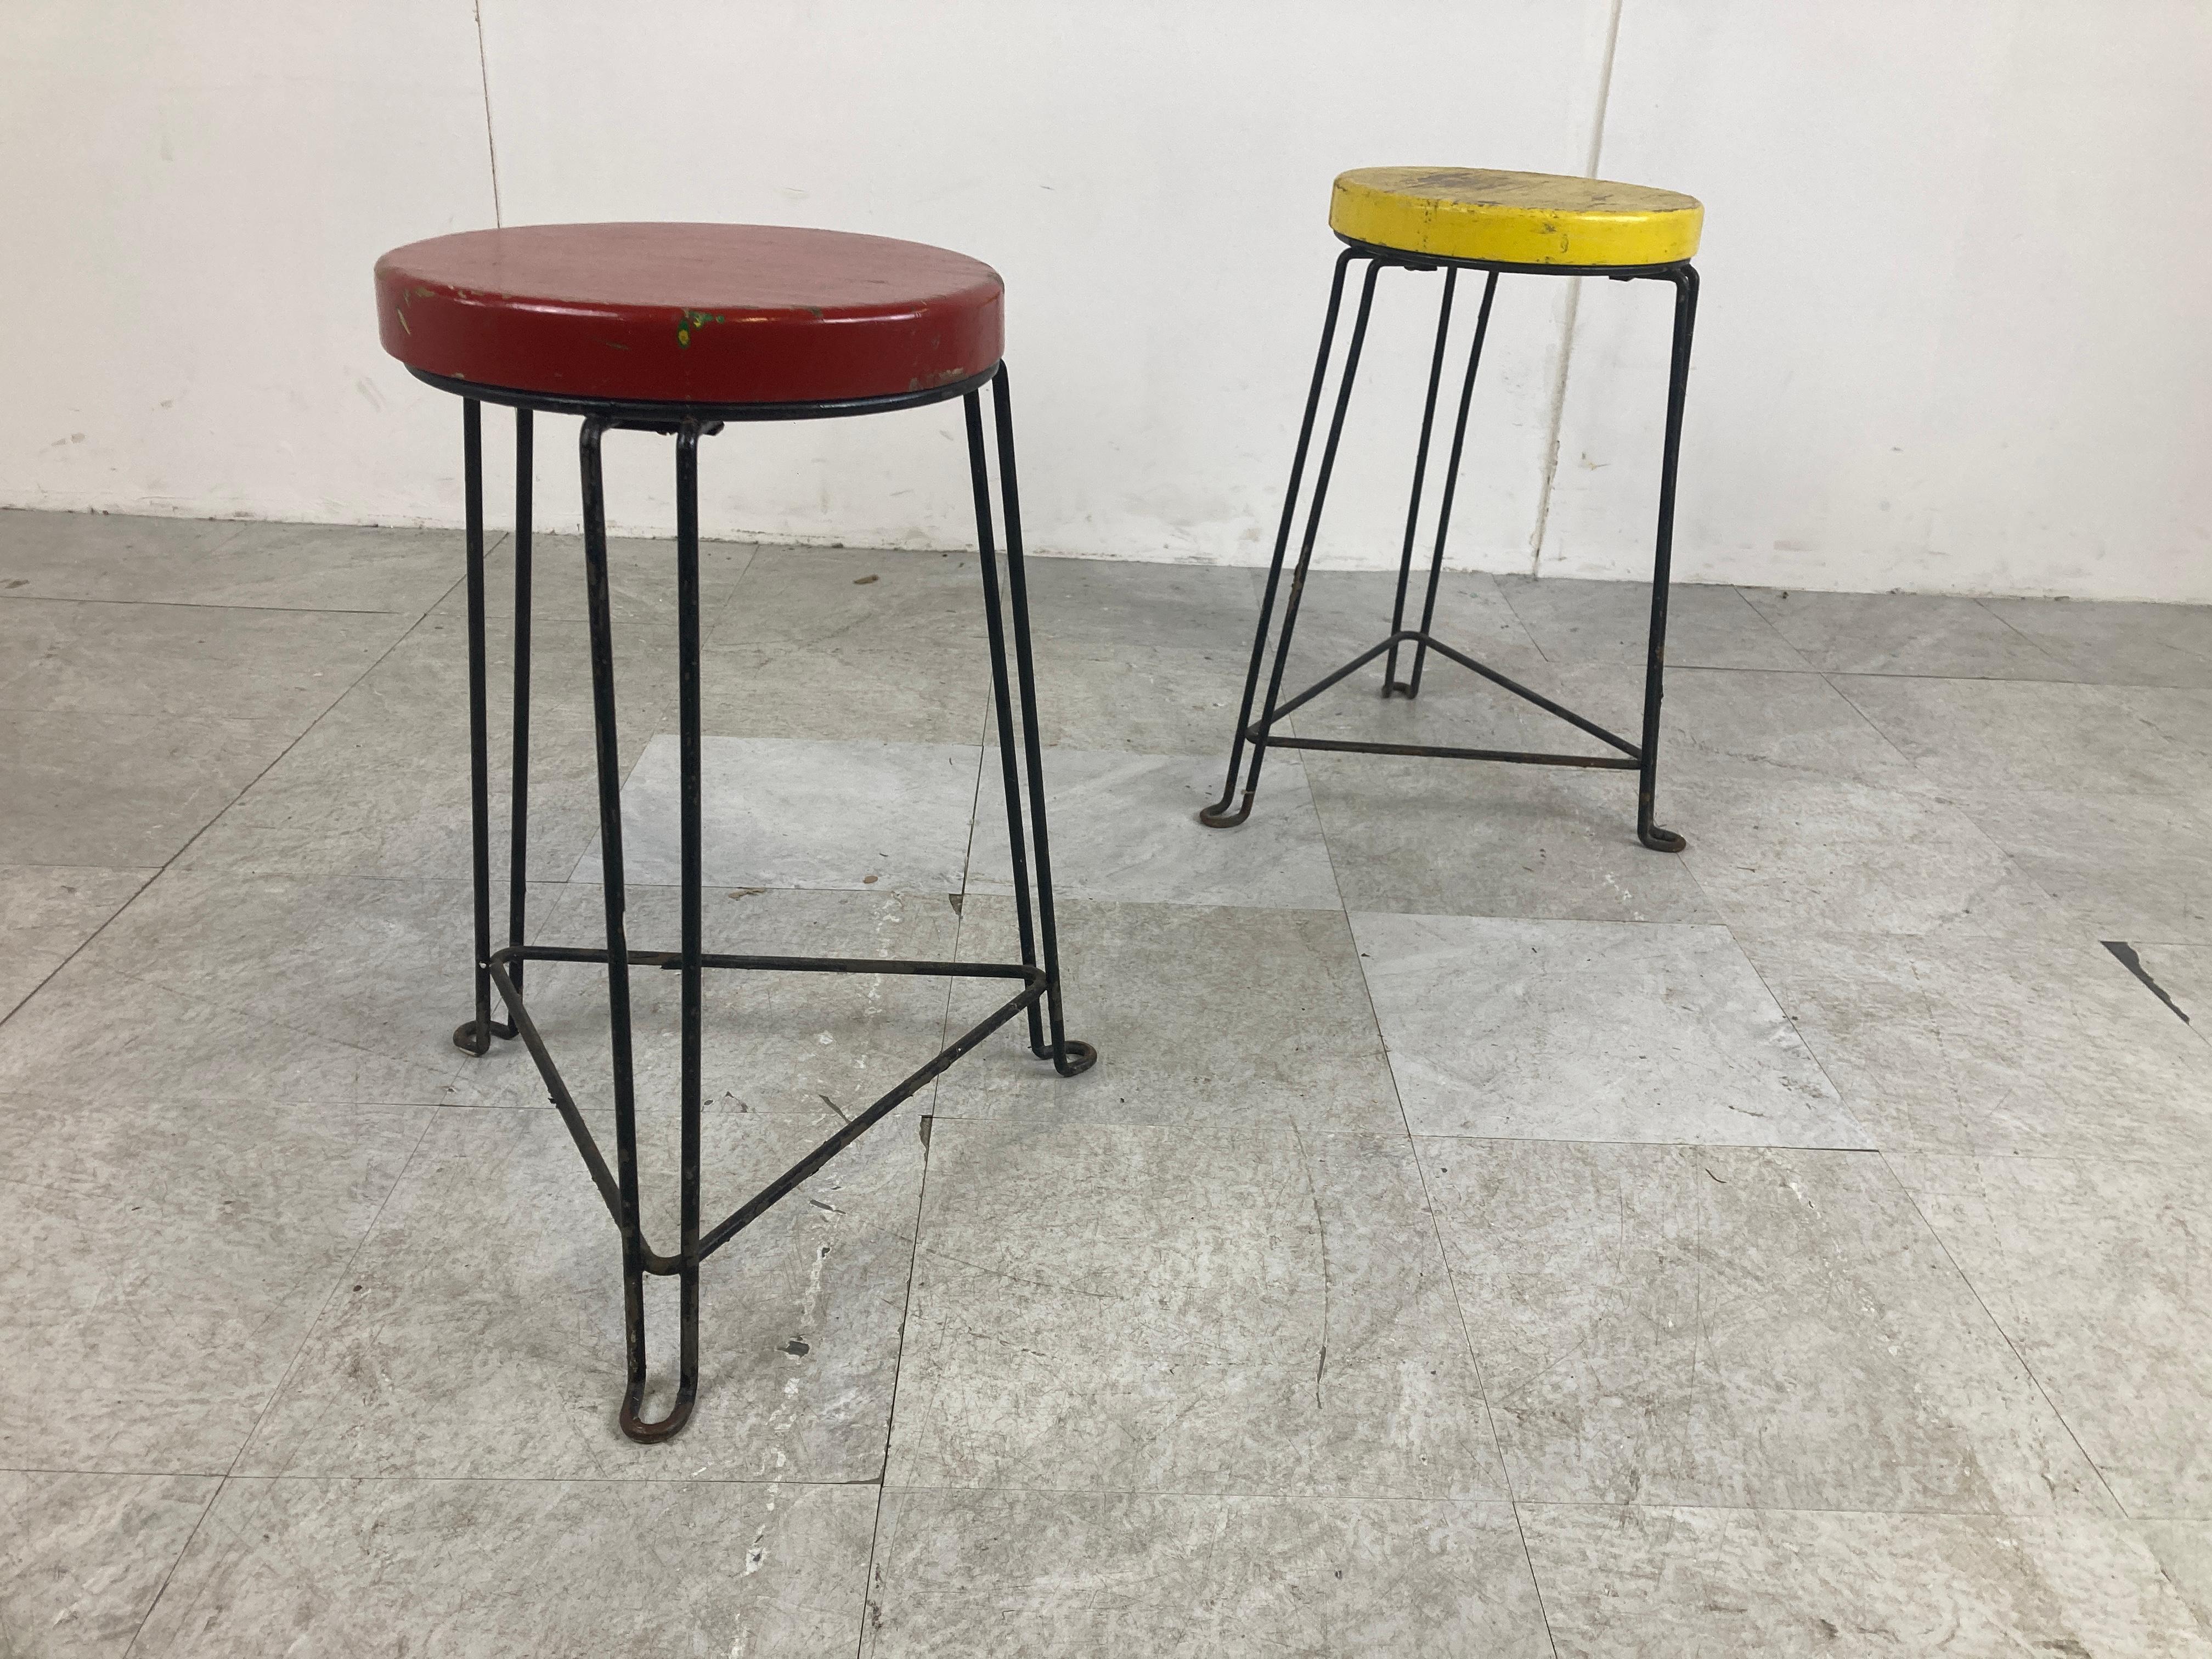 Pair of Midcentury Industrial Stools, 1950s For Sale 4